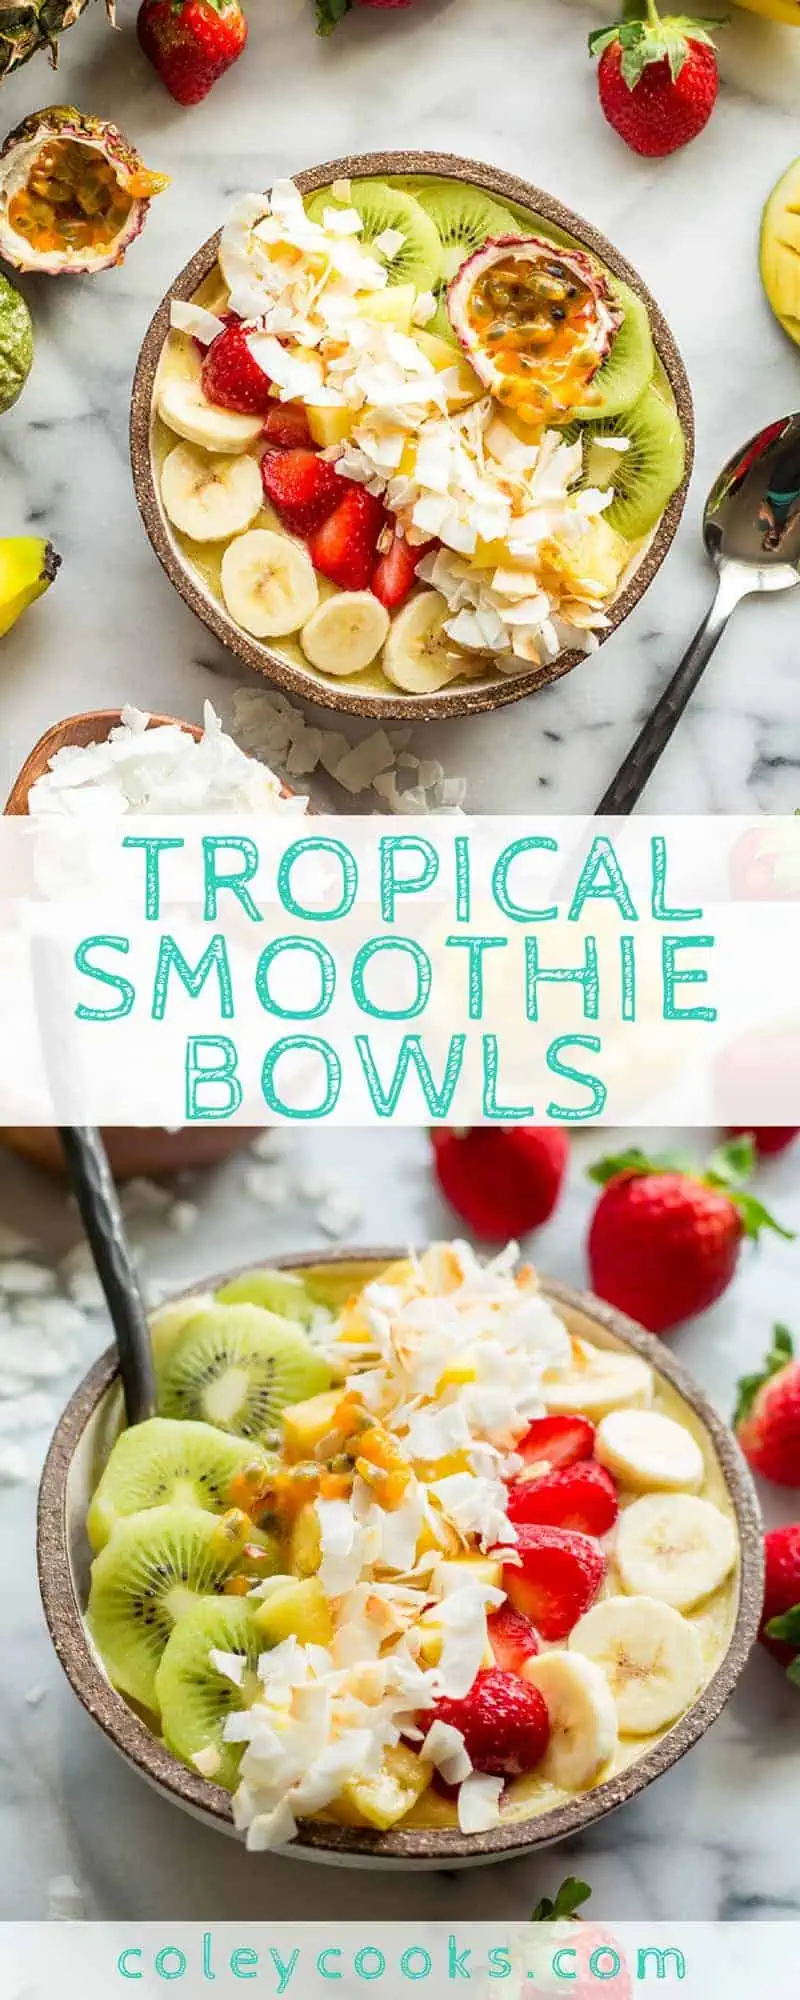 TROPICAL SMOOTHIE BOWLS | Beautiful smoothie bowls! This easy smoothie bowl recipe is loaded with healthy fruit and has the bold flavor of passionfruit, mango, banana and pineapple! #glutenfree #vegan | ColeyCooks.com